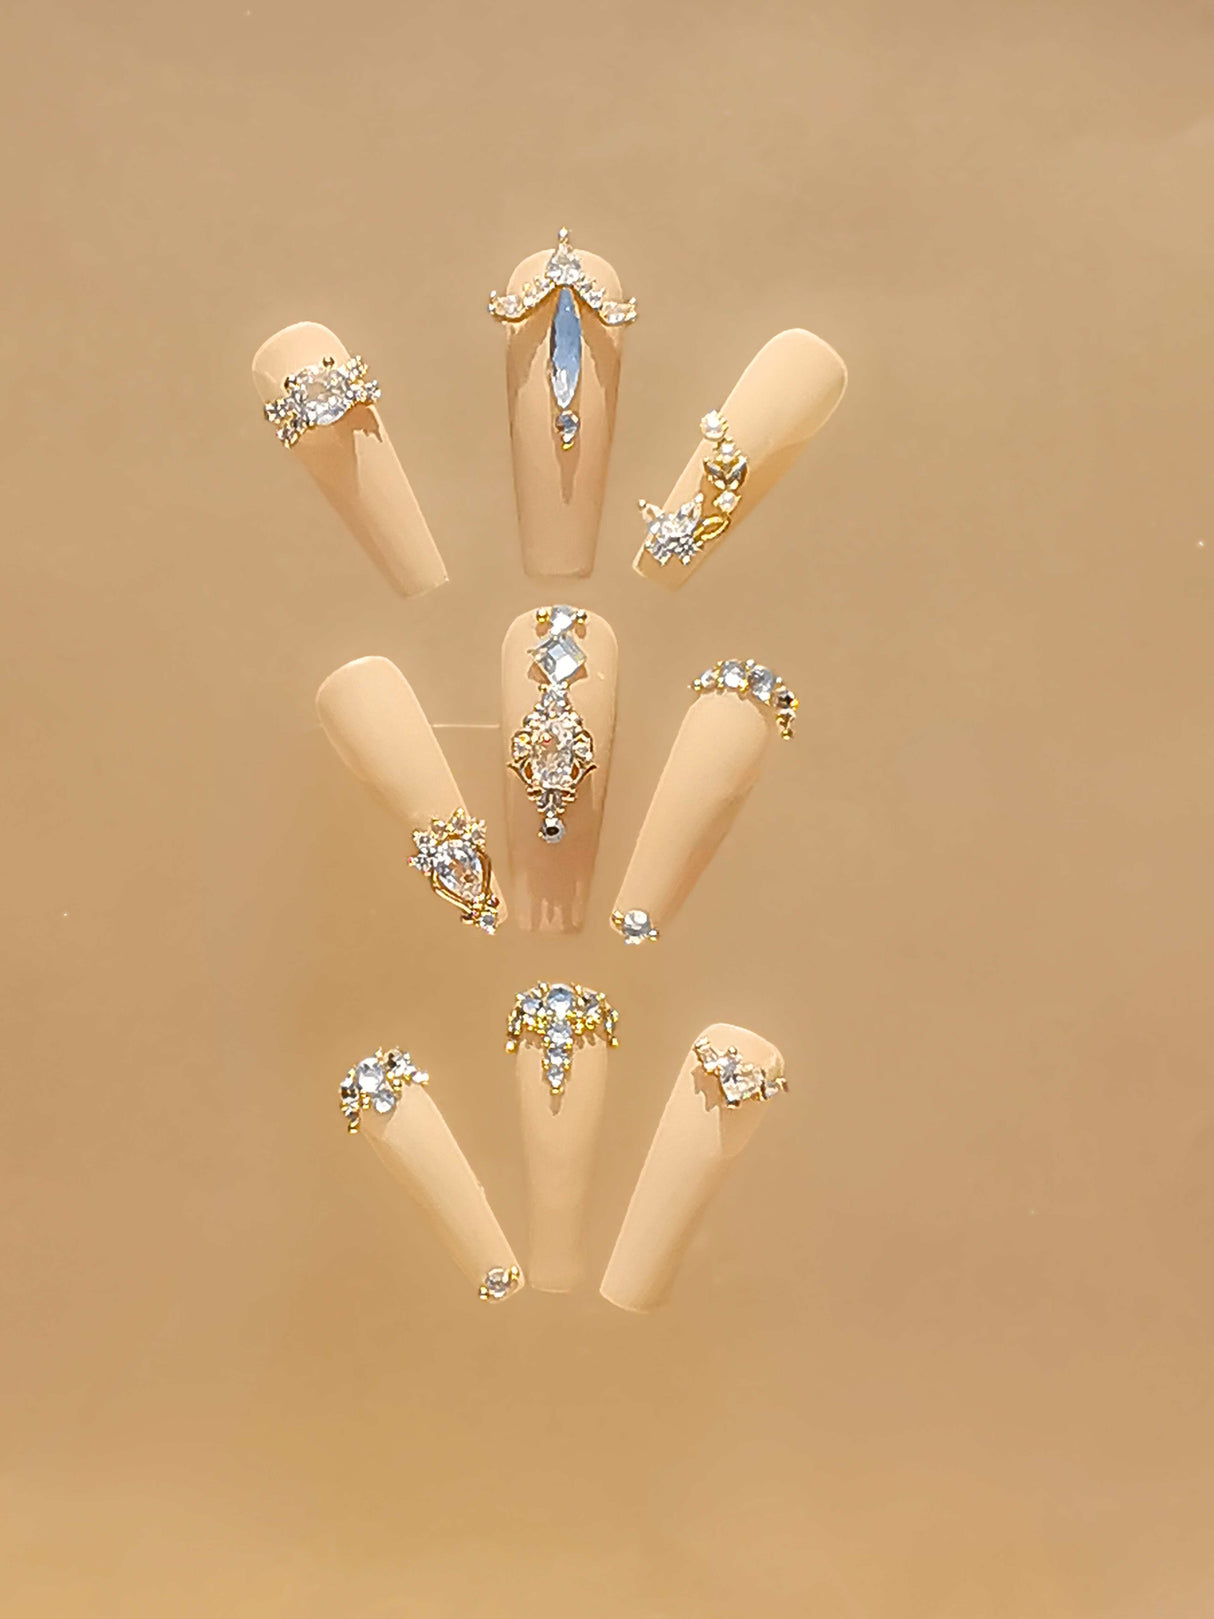 Luxurious and glamorous nails with trendy handcrafted nail art, incorporating rhinestones and crystals in different patterns, suitable for special occasions.